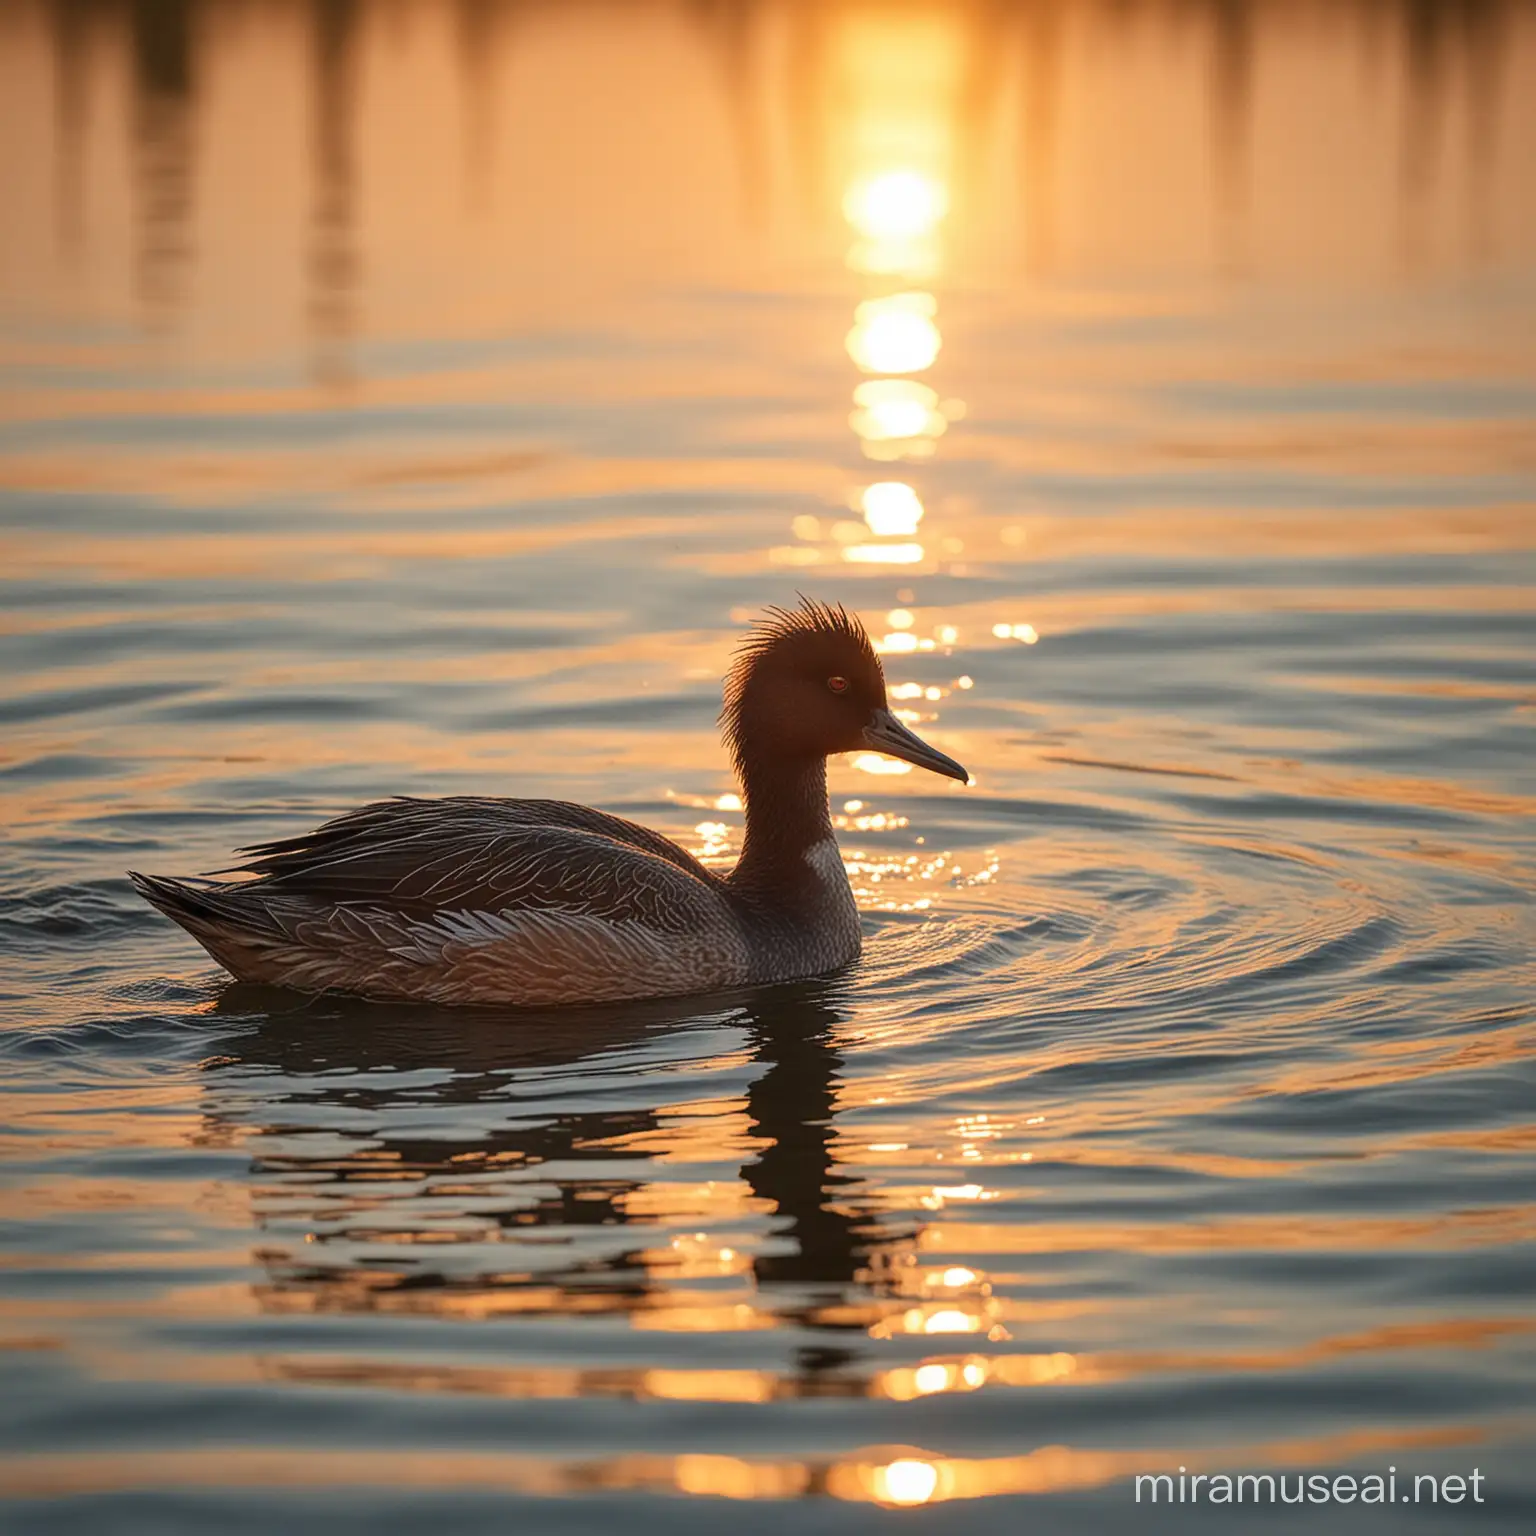 Professional nature photography of a Podiceps cristatus swimming in the water, with the sunset in the background. The style is natural and realistic. The composition highlights the Podiceps cristatus and creates a calm, peaceful, and beautiful atmosphere. 
